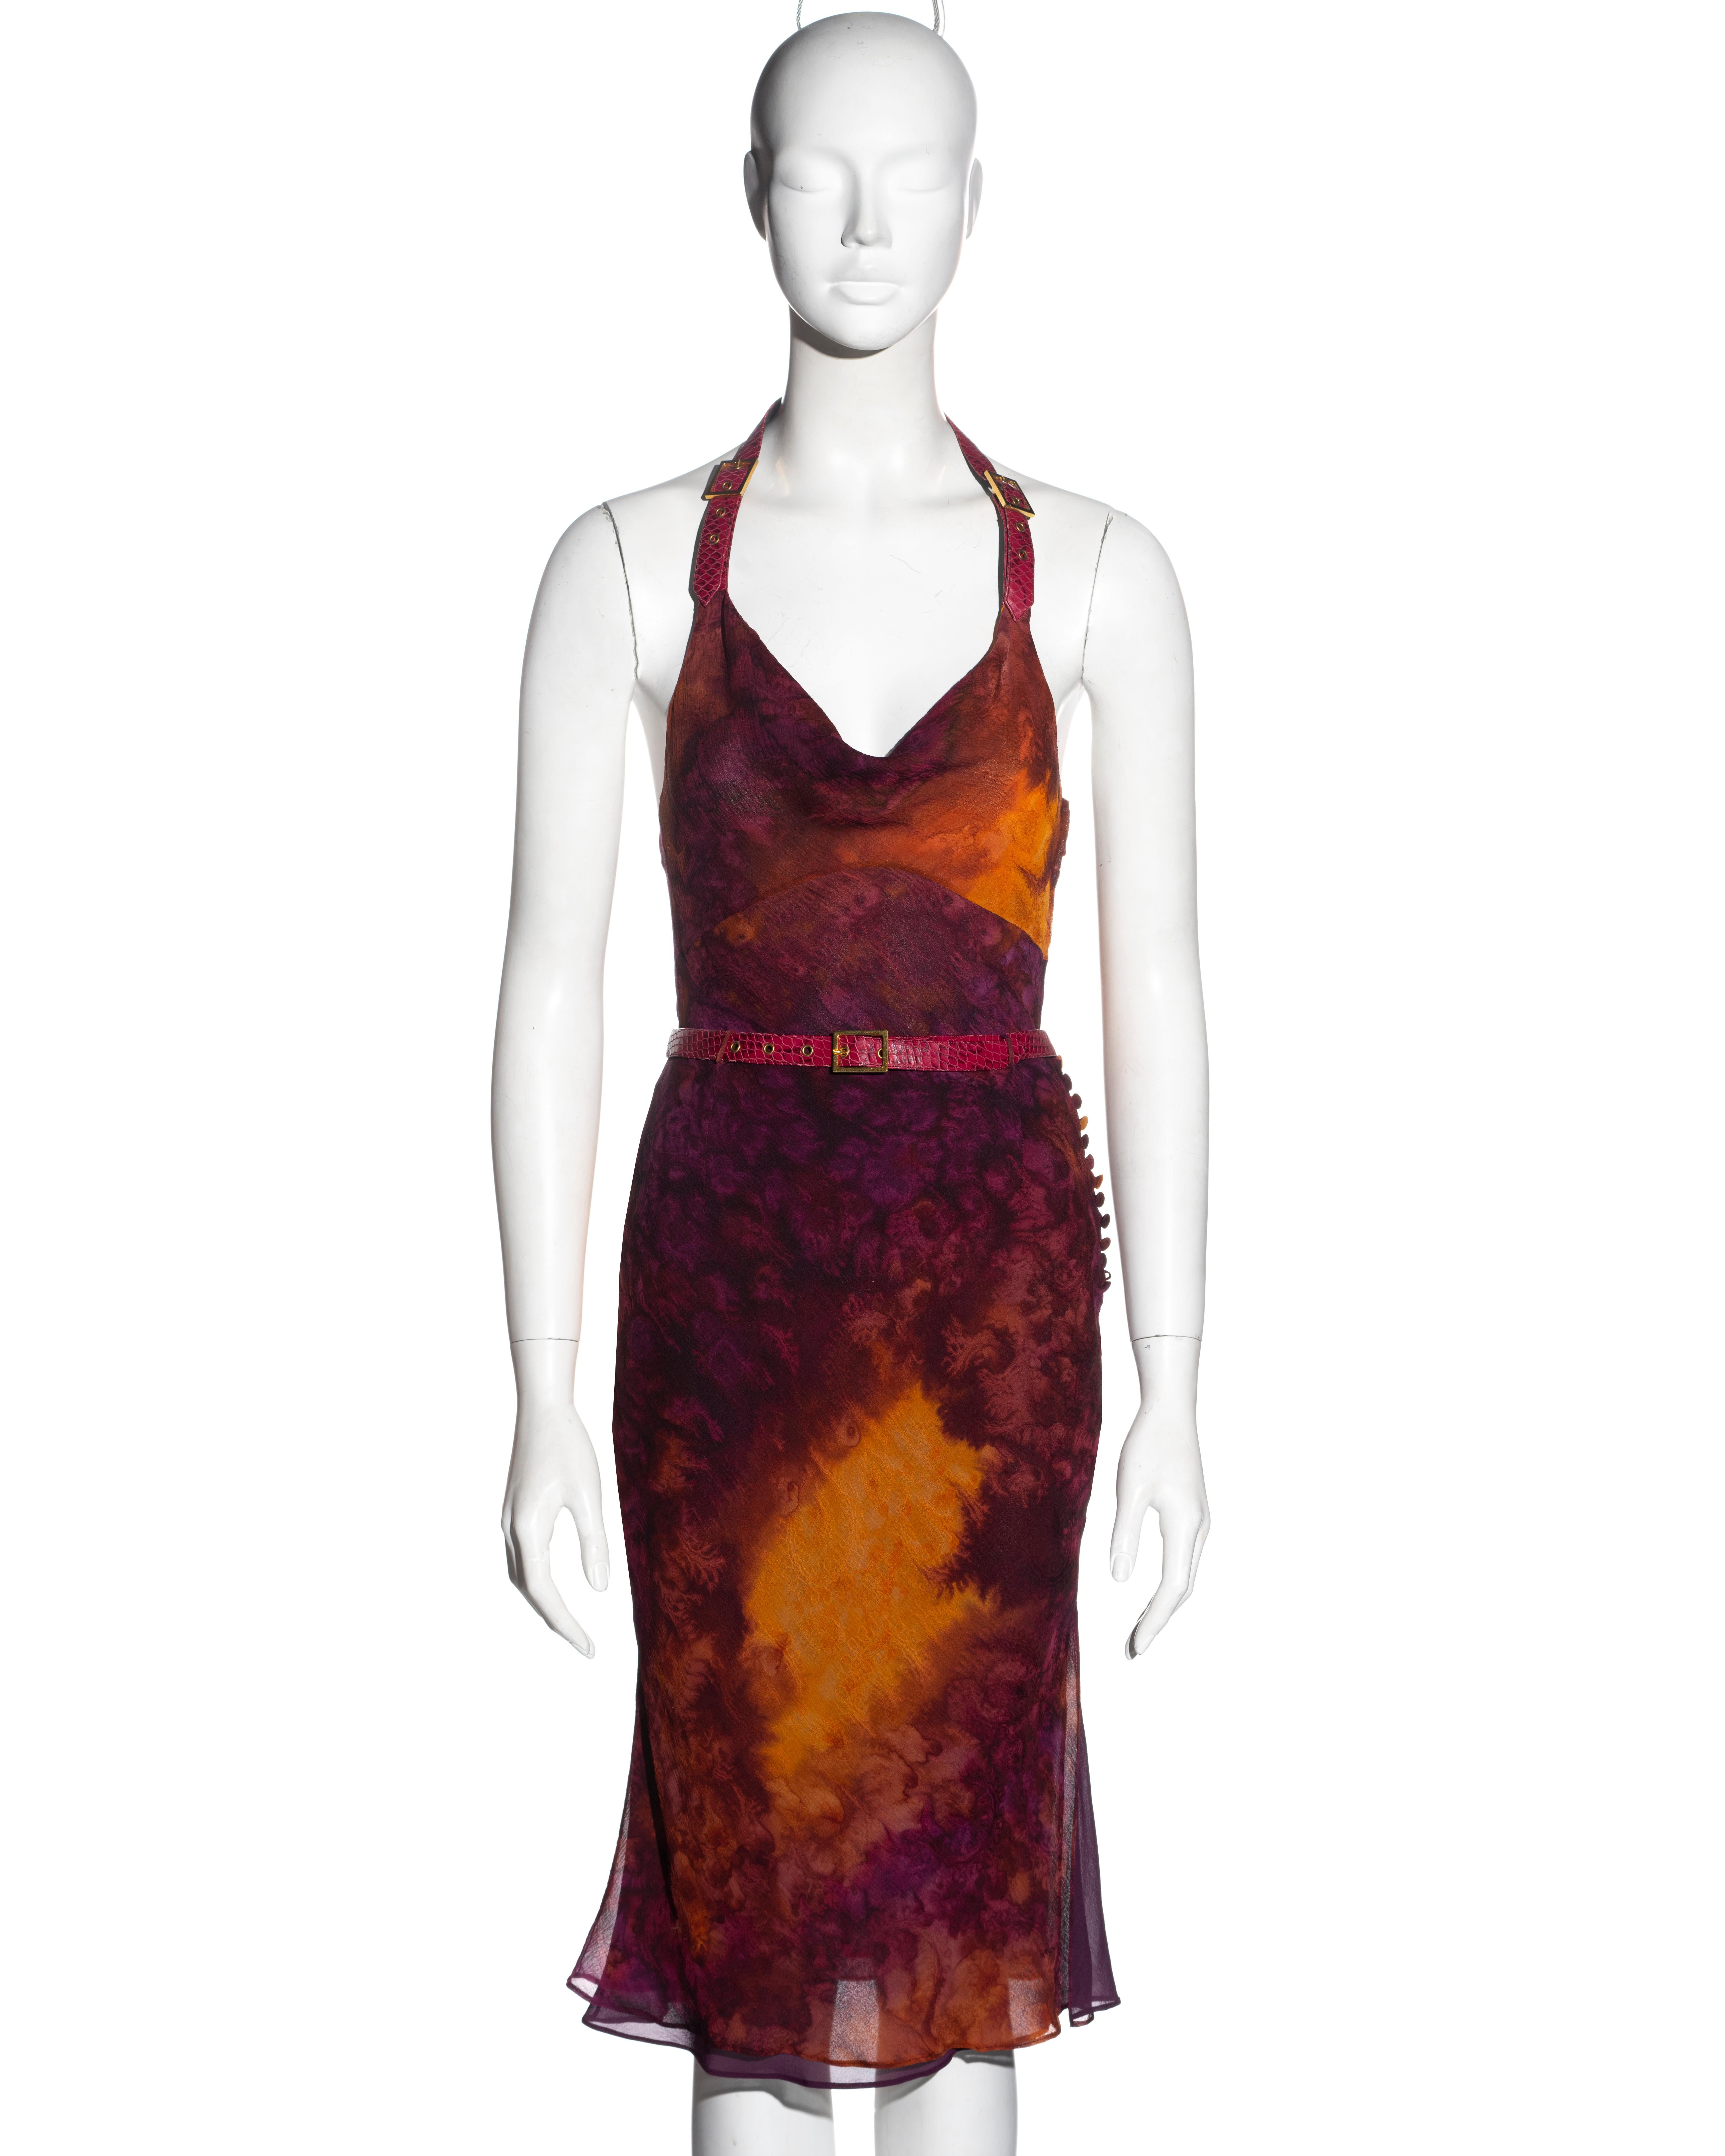 ▪ Christian Dior silk top and skirt set
▪ Designed by John Galliano
▪ Purple and orange tie-dyed silk chiffon 
▪ Snakeskin print calfskin leather halter-neck and belt
▪ Gold-tone metal buckles
▪ Cowl neck
▪ Mid-length skirt with side slit
▪ Can be